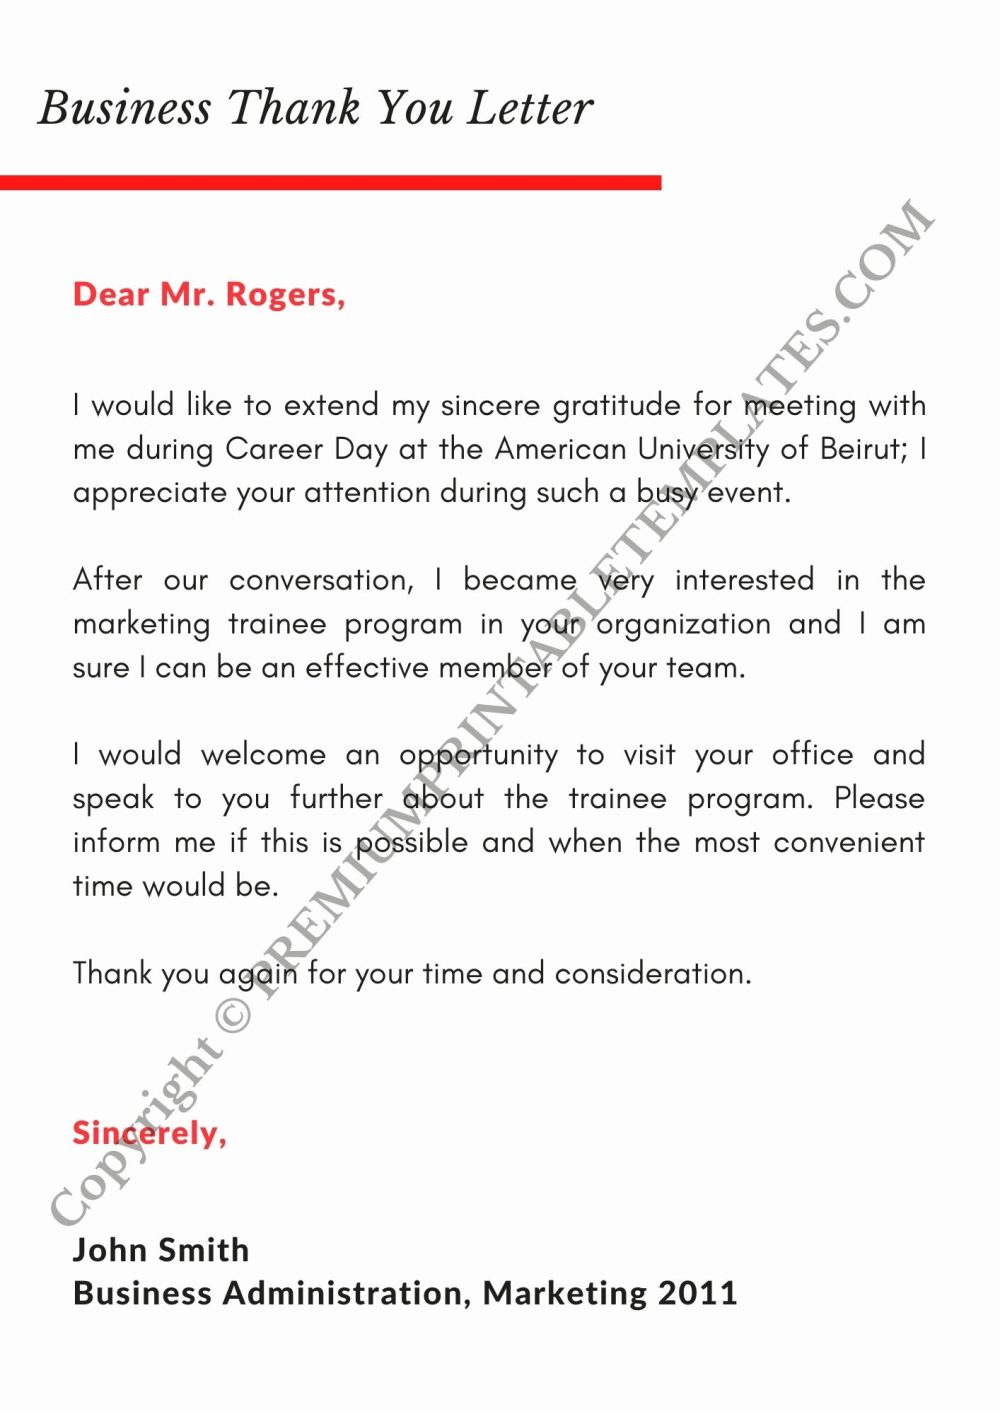 Business thankyou letter template